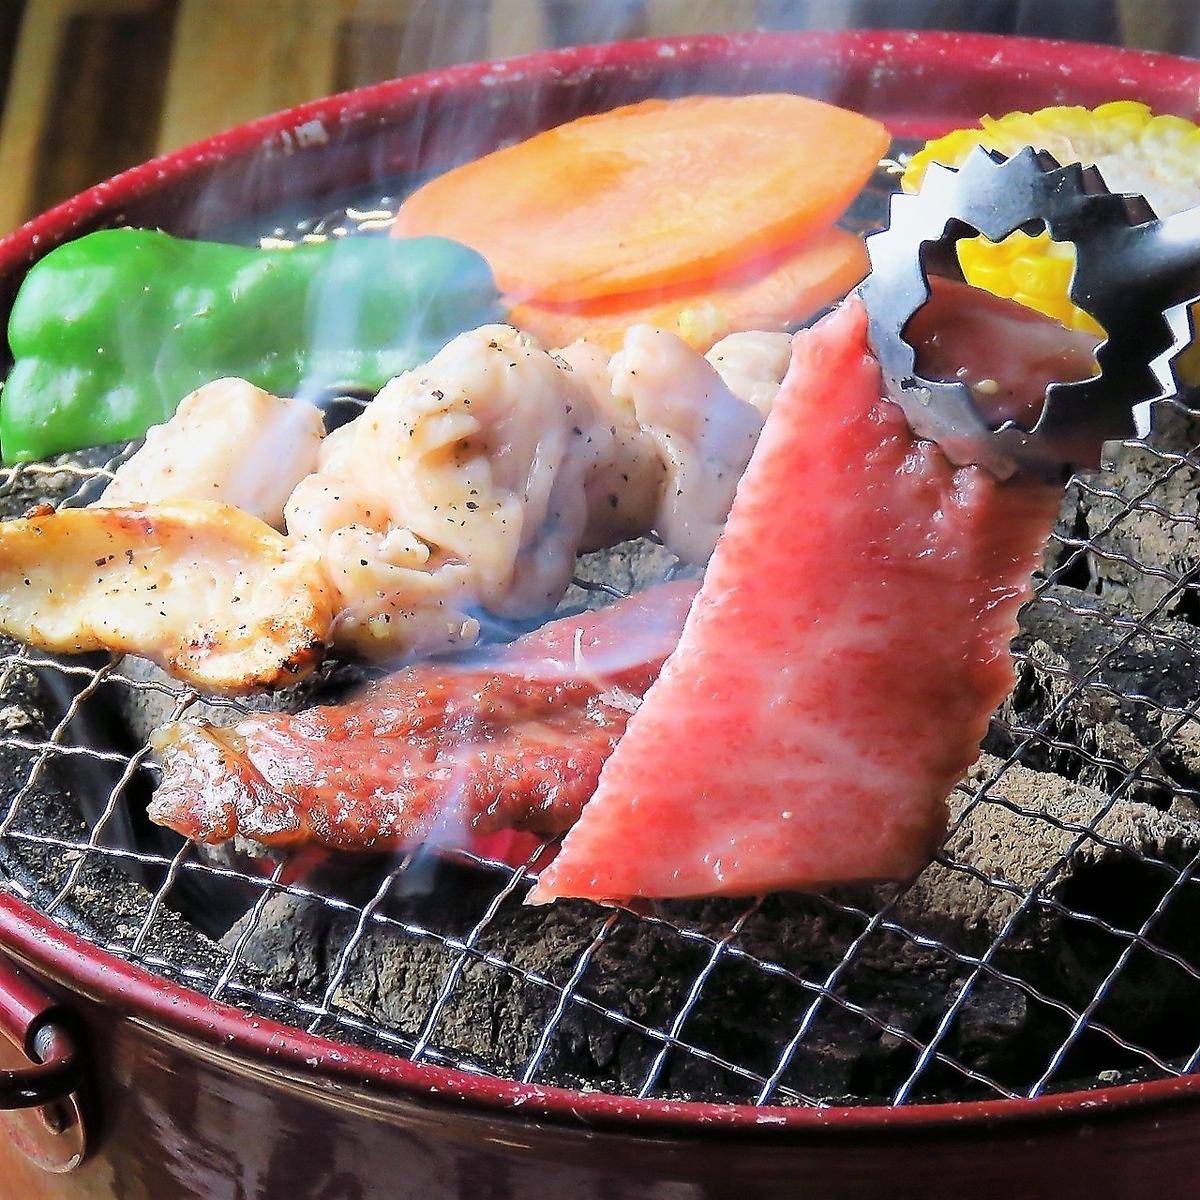 We recommend the meat platter◎This is a community-based Yakiniku restaurant!